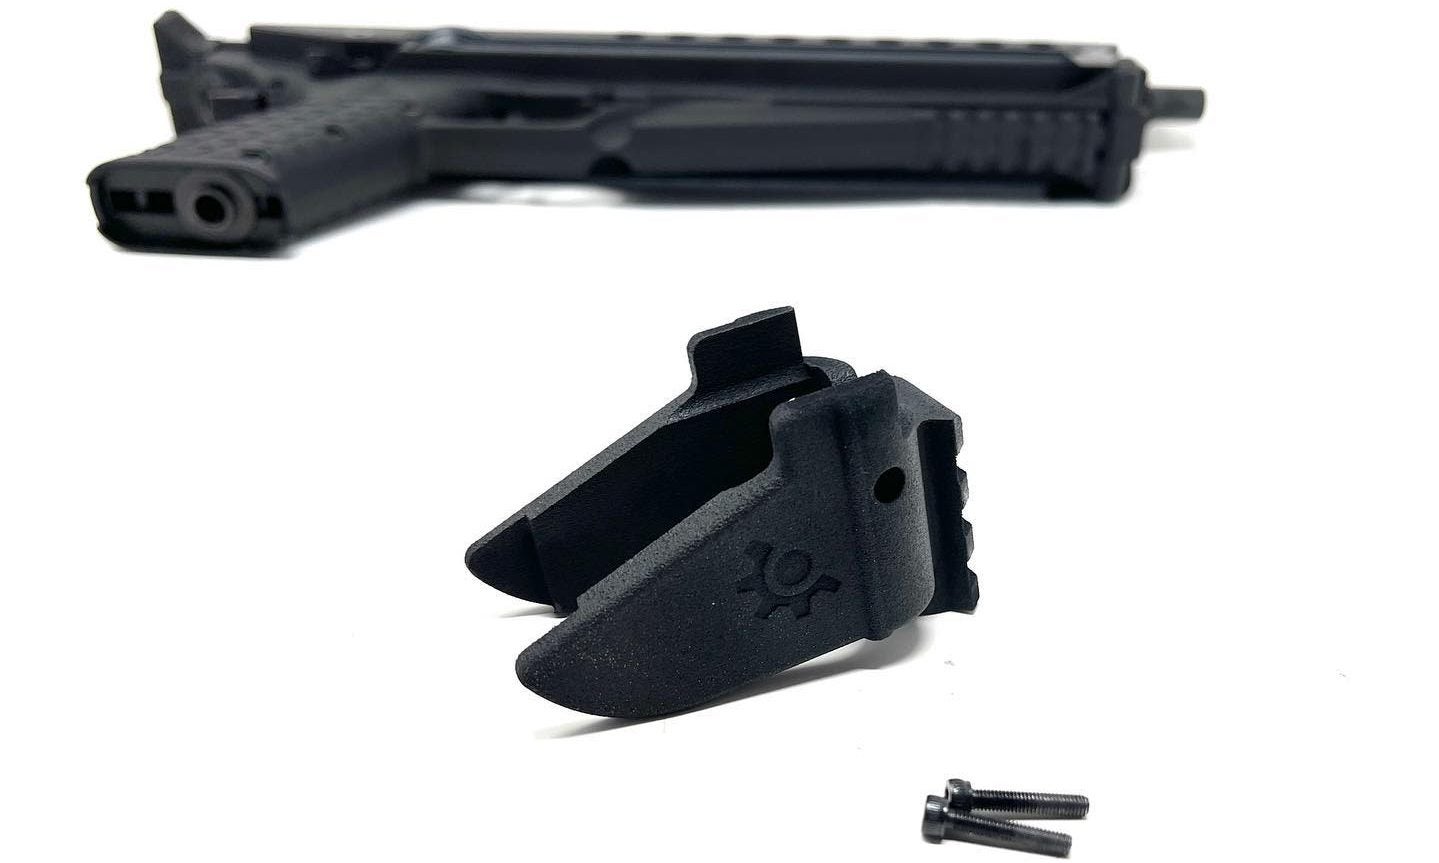 New CSM P50 Pic Rail for the KelTec P50 from Custom Smith MFG